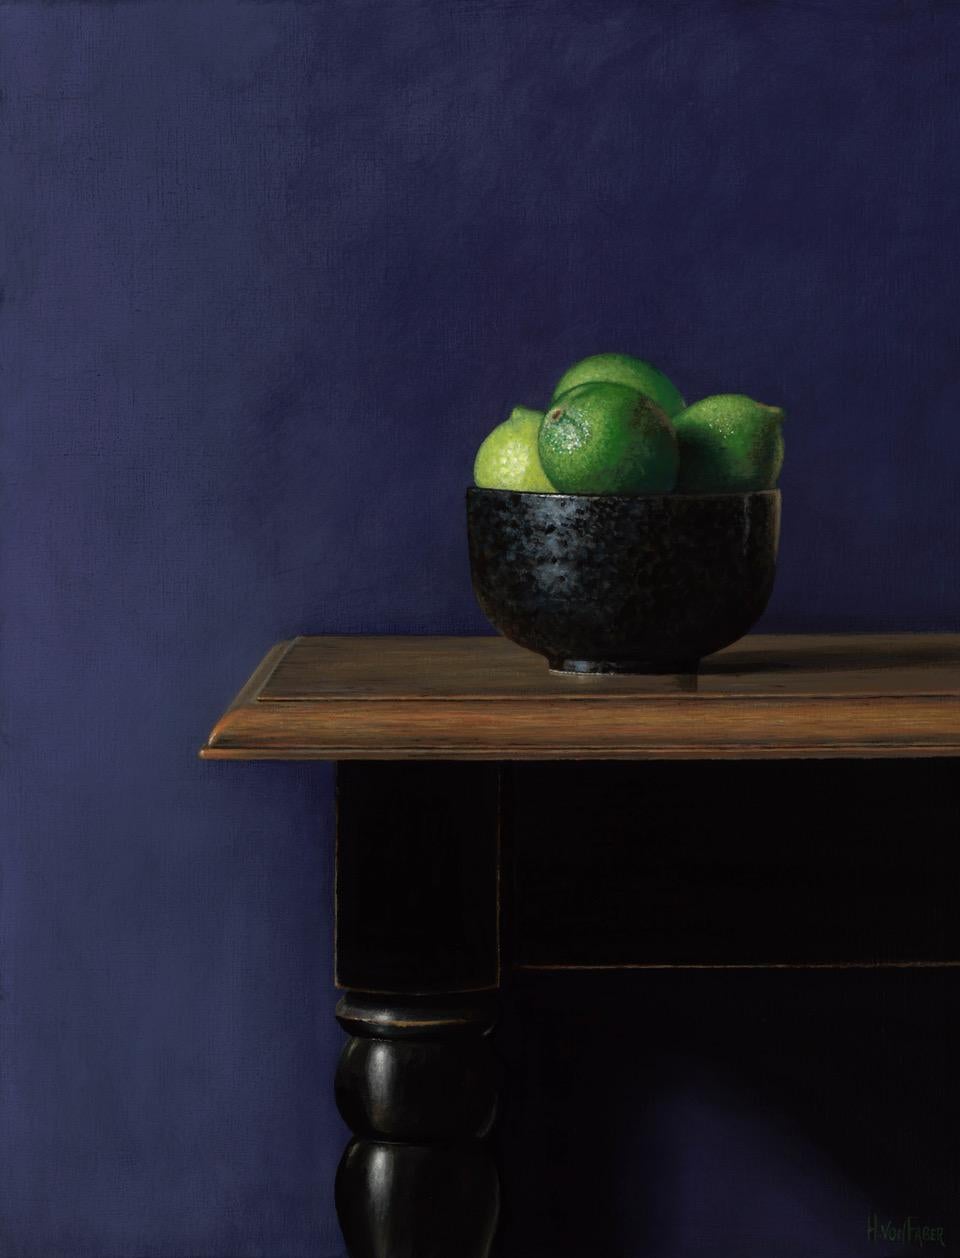 Limes in a black bowl-21st Century Realistic Contemporary Still-life painting 